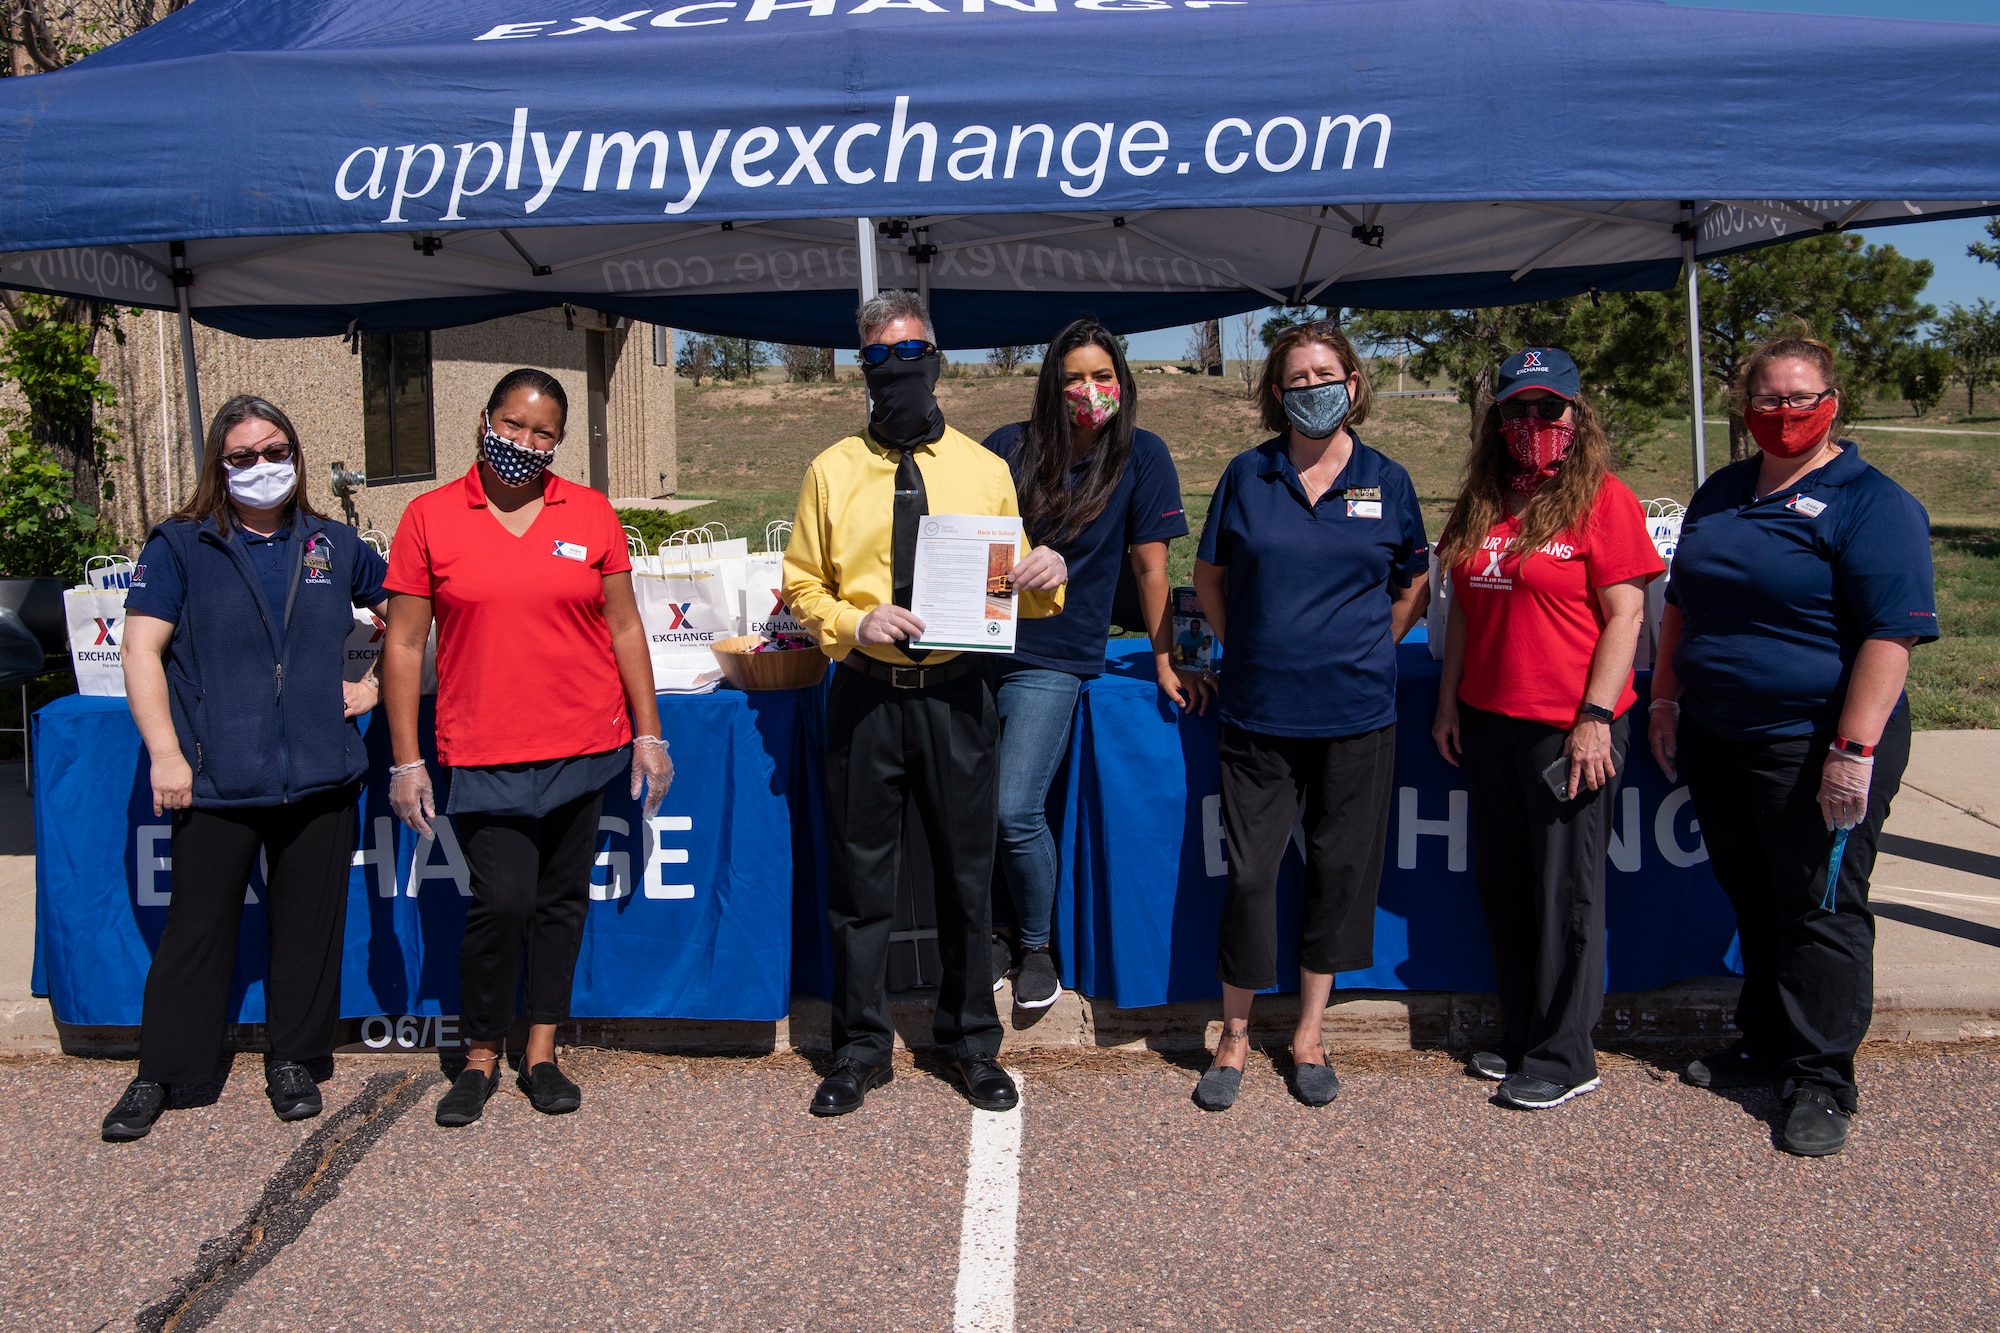 Employees from the Army and Air Force Exchange Service volunteered to give out free school supplies during a back-to-school drive July 31, 2020, at Schriever Air Force Base, Colorado. AAFES handed out free pencils, sunglasses, tissues, coloring books and more to Schriever families. (U.S. Air Force photo by Airman 1st Class Jonathan Whitely)